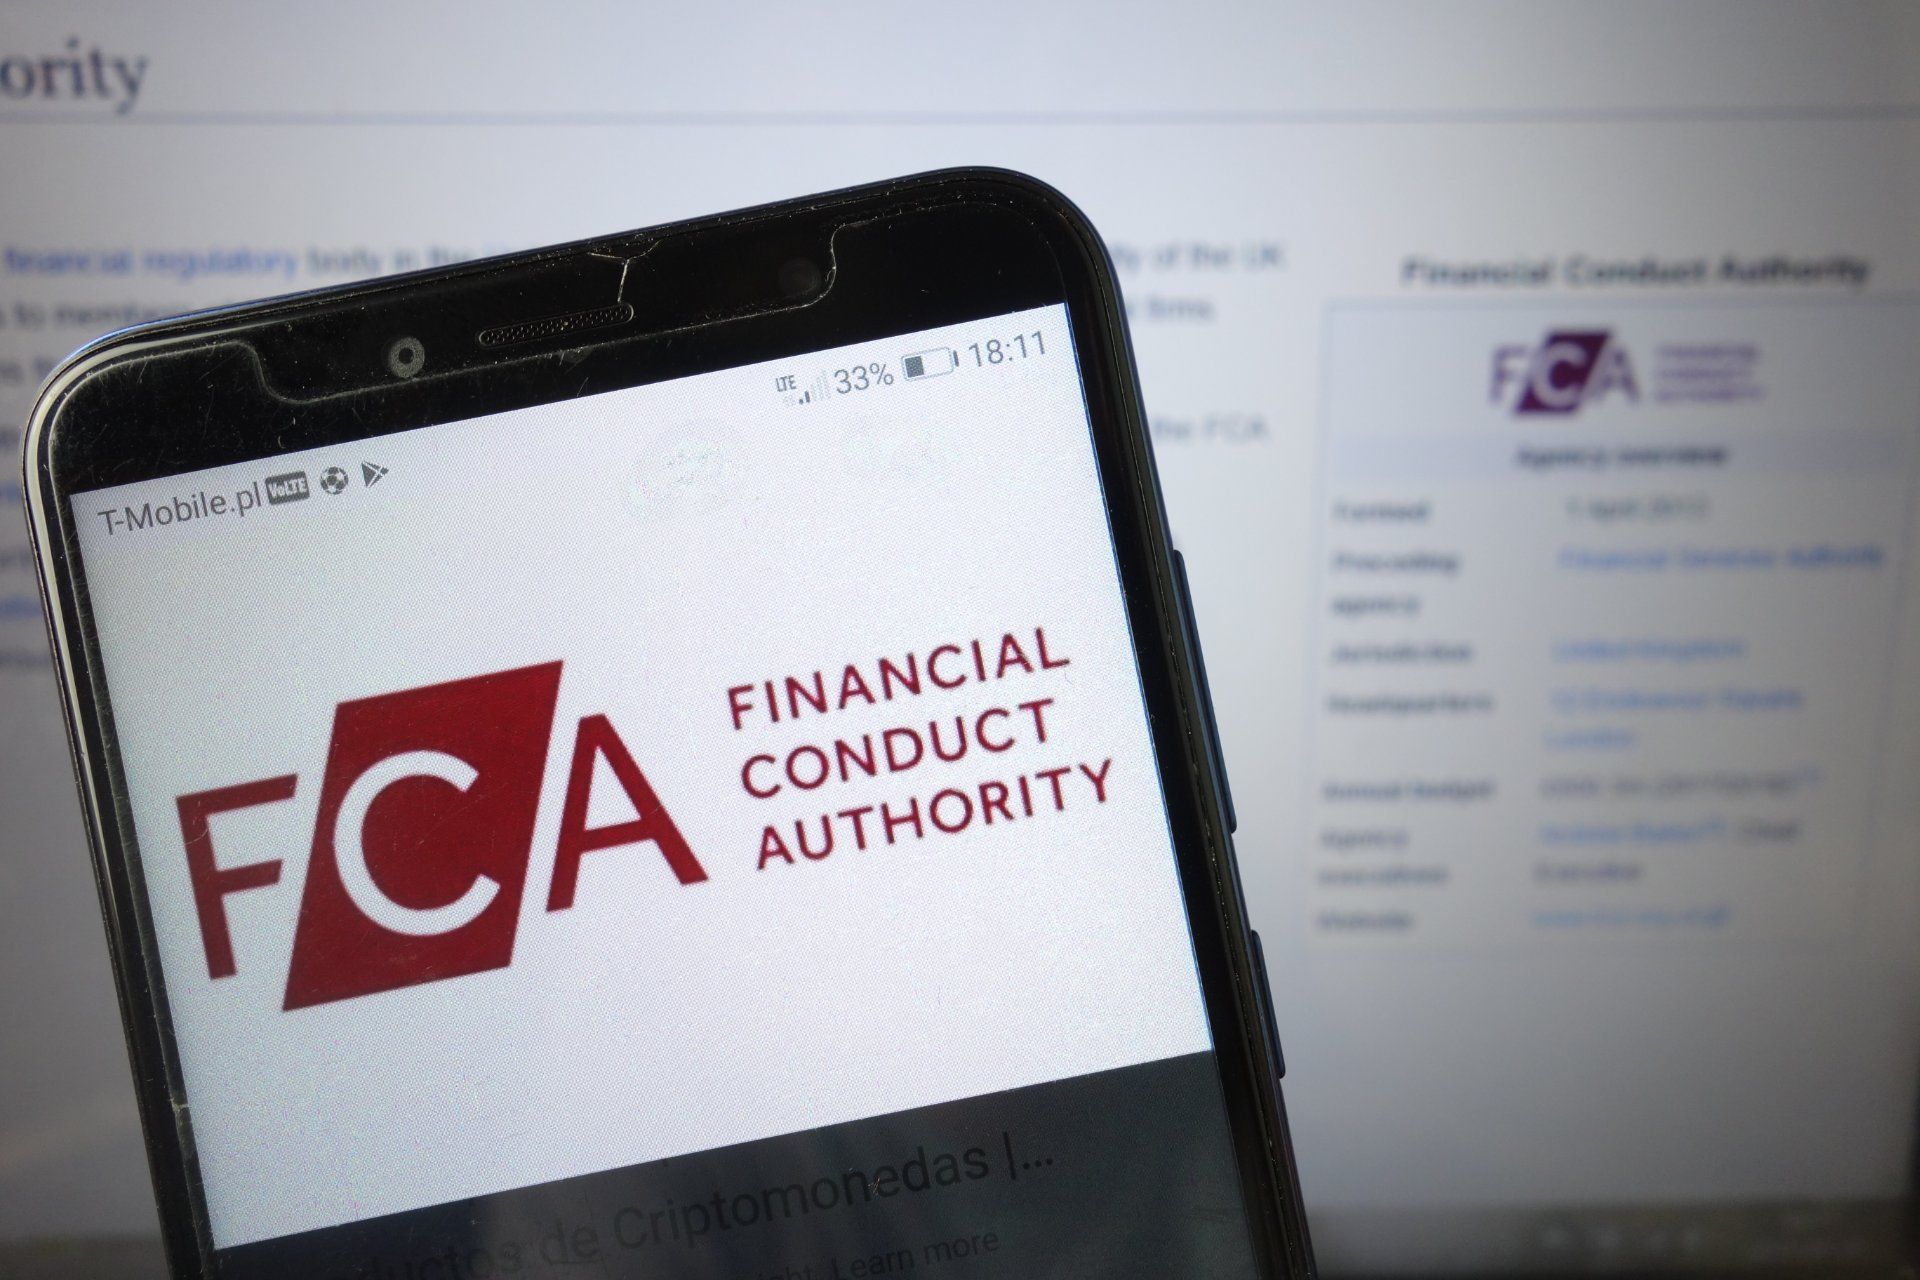 FCA website shown on smartphone and desktop monitor in the background - complaints scheme